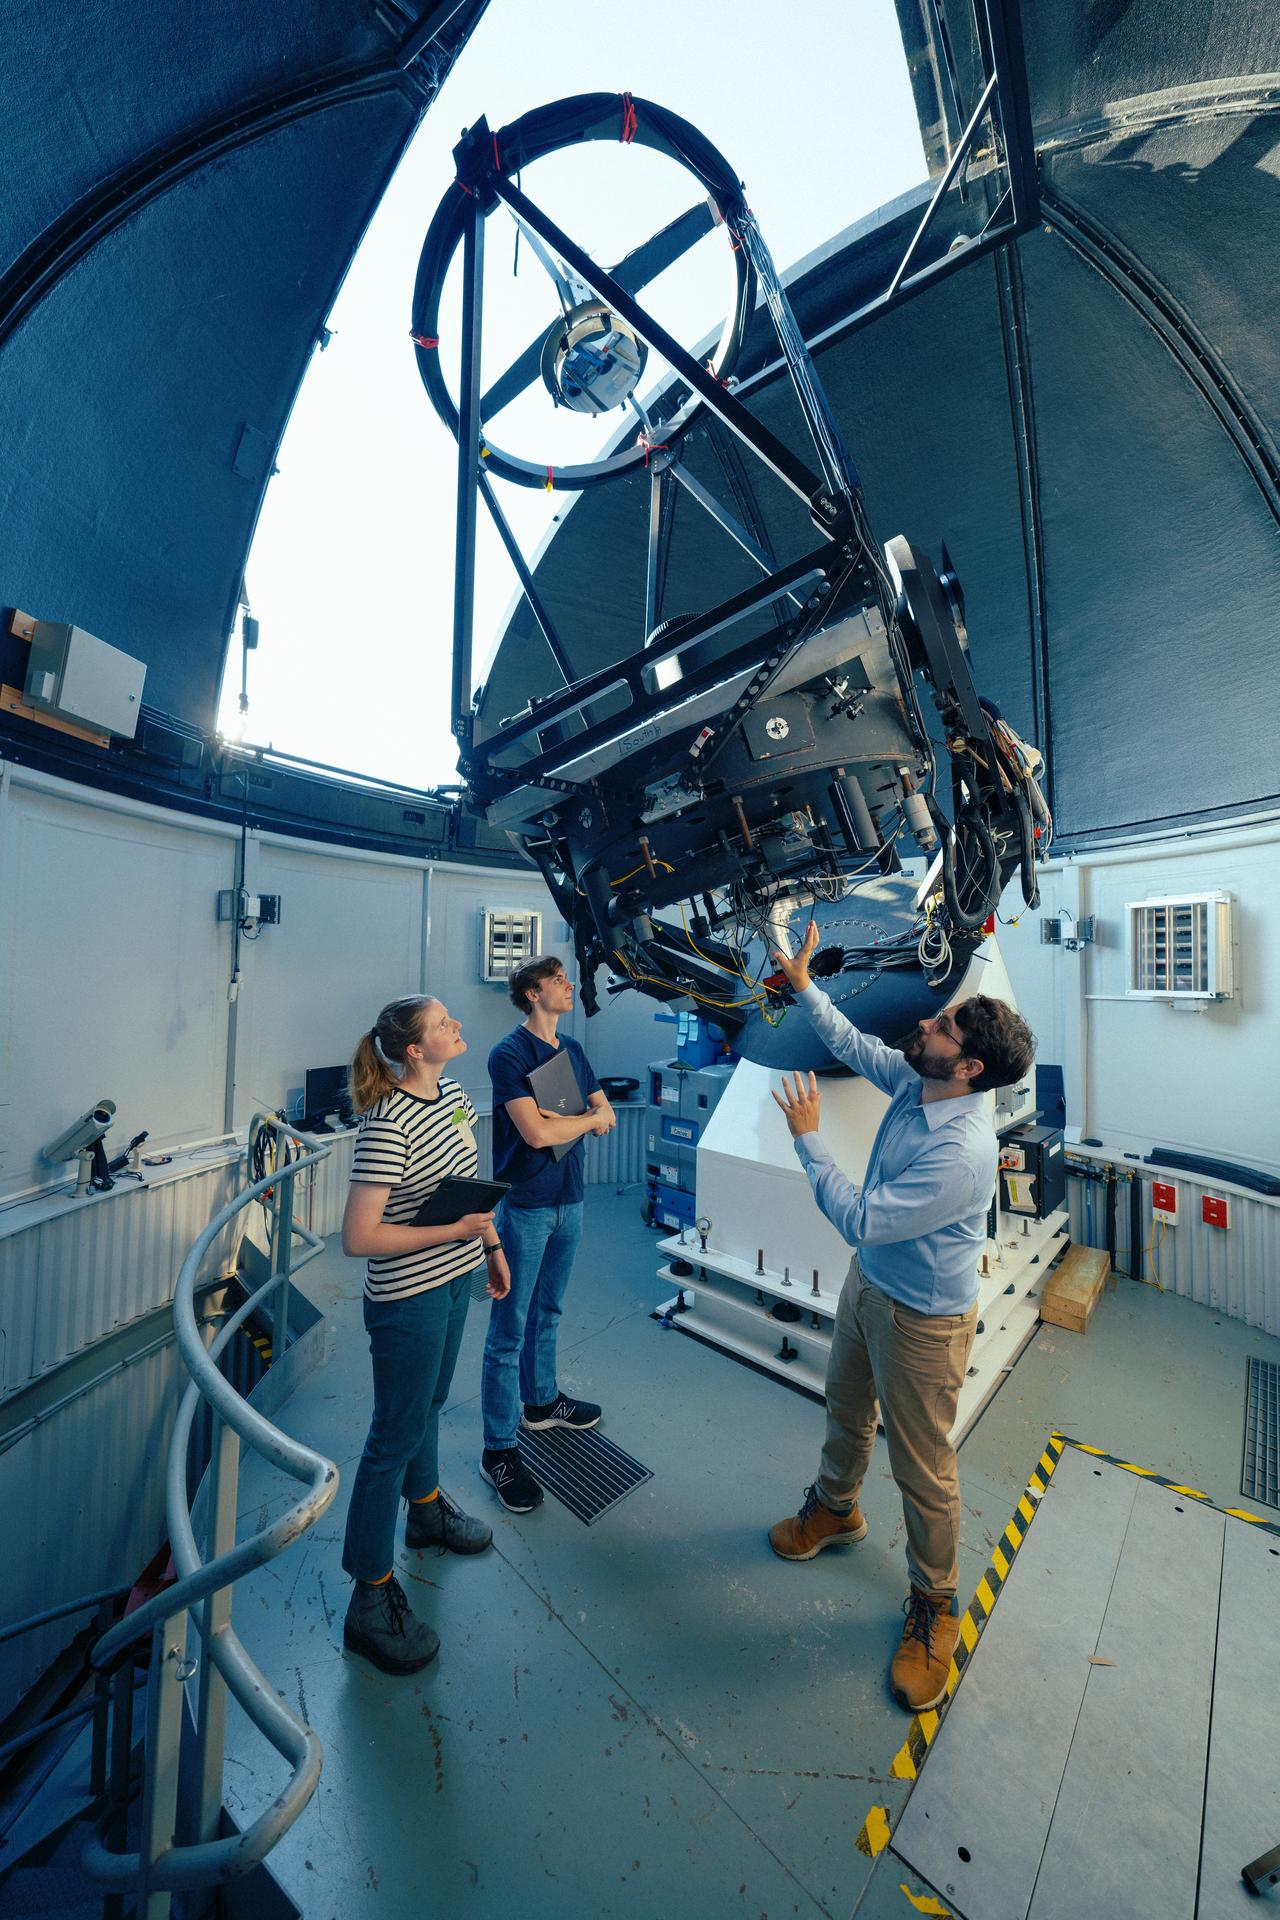 Physics students Matilda Downes Smolenski and Euan Hamdorf take a close look at one of the optical telescopes at Greenhill Observatory with telescope technical officer Bryn Emptage.